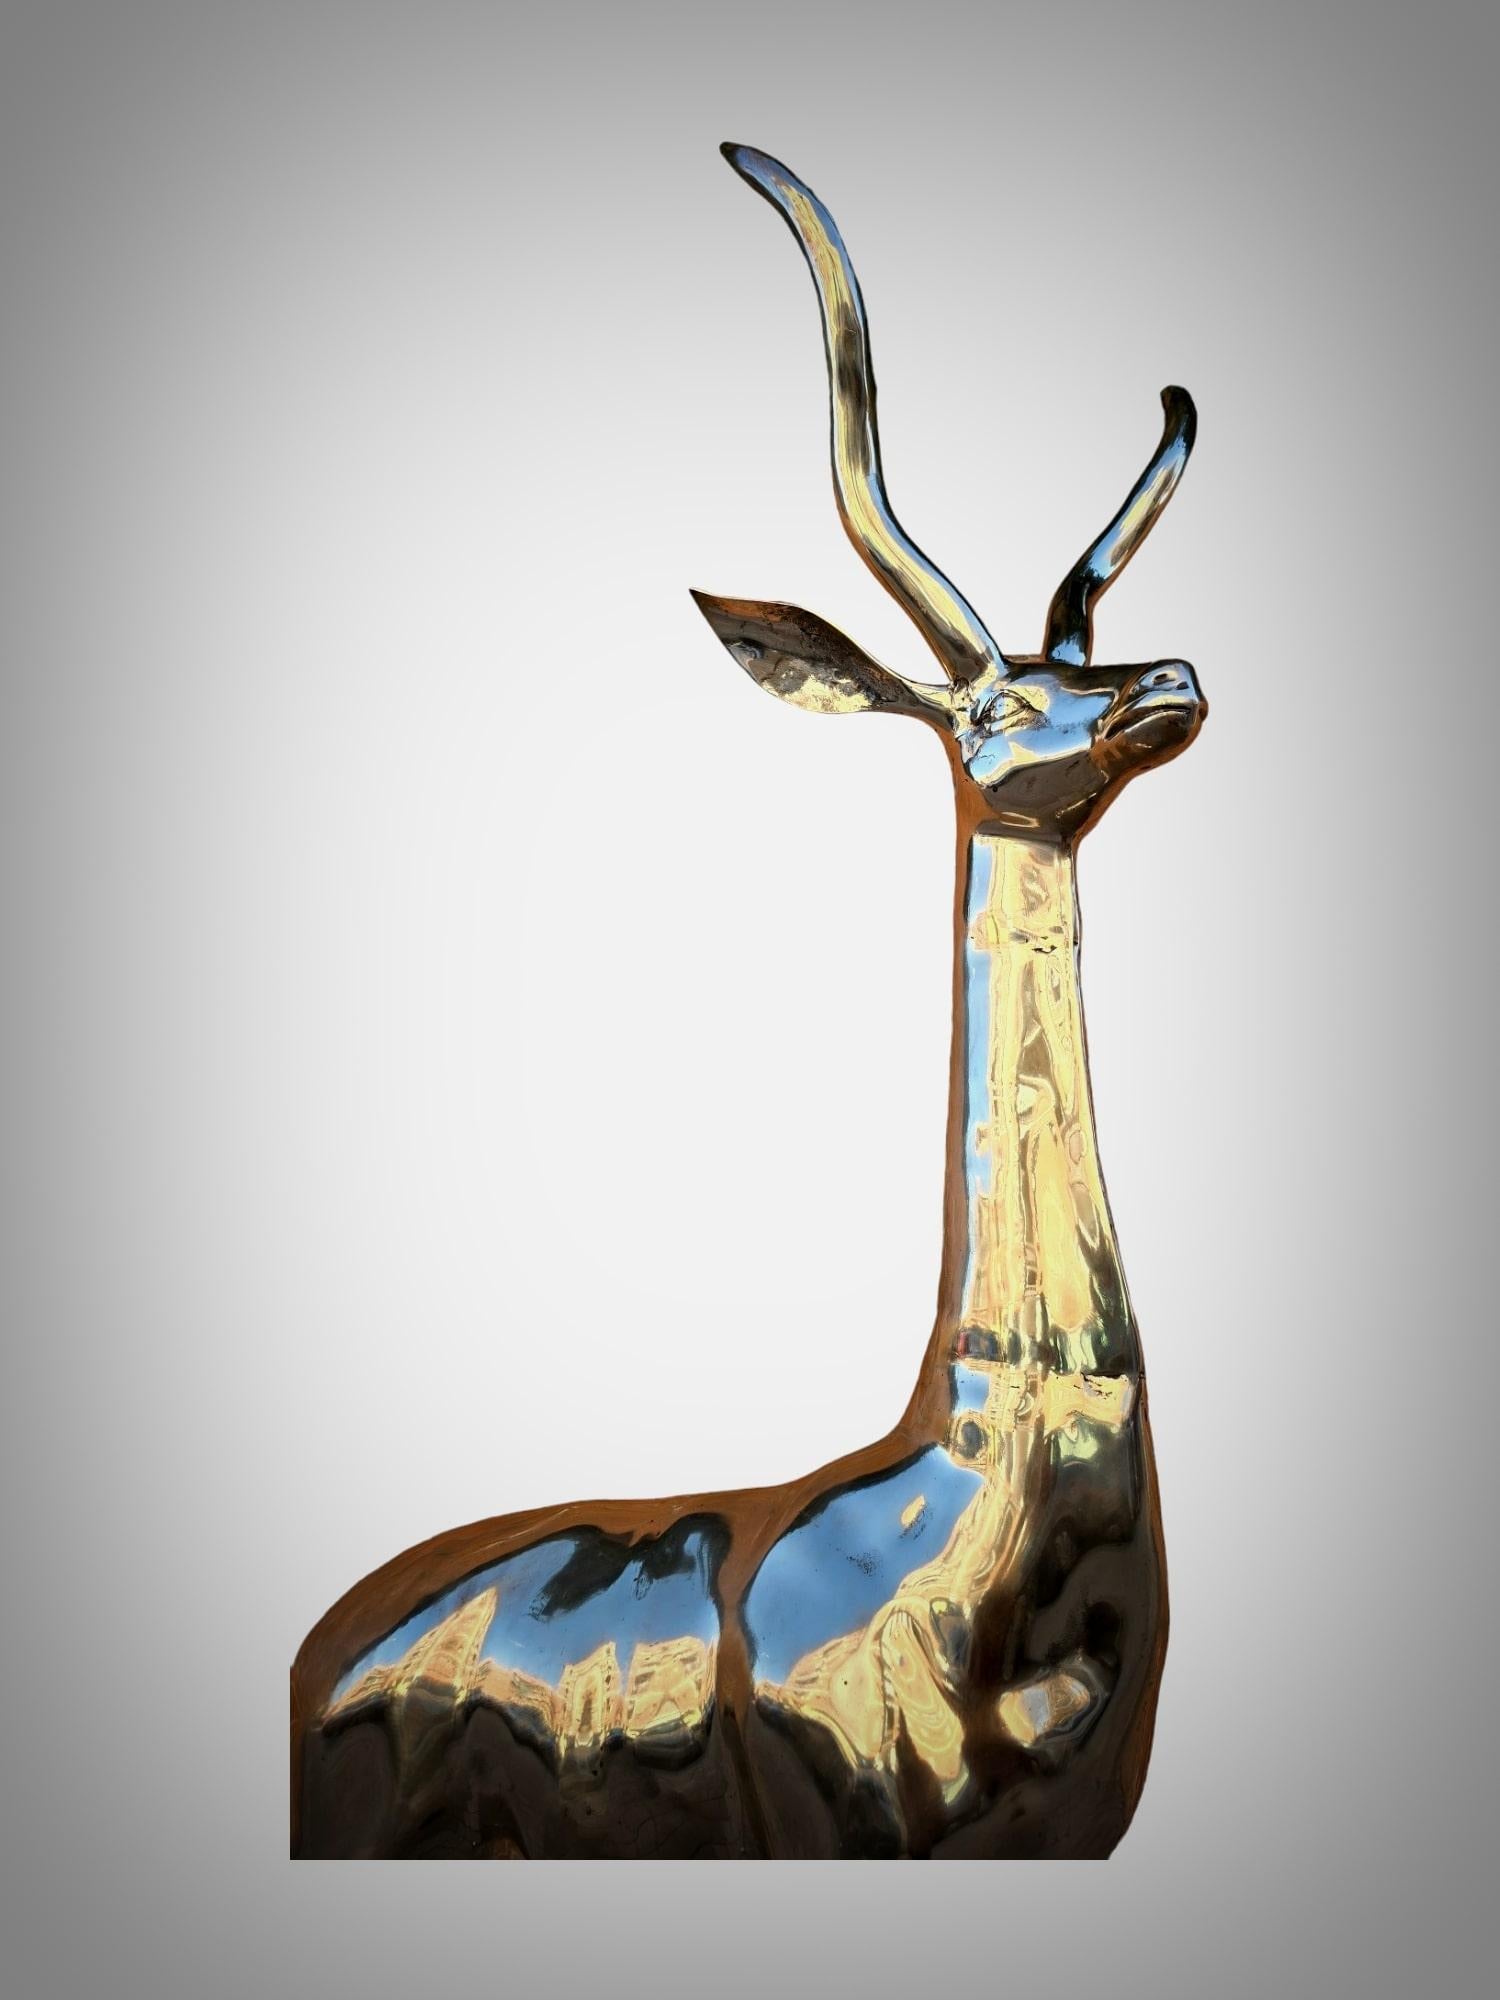 Exquisite Polished Bronze Sculpture: Lifesize Antelope from the 1950s For Sale 7